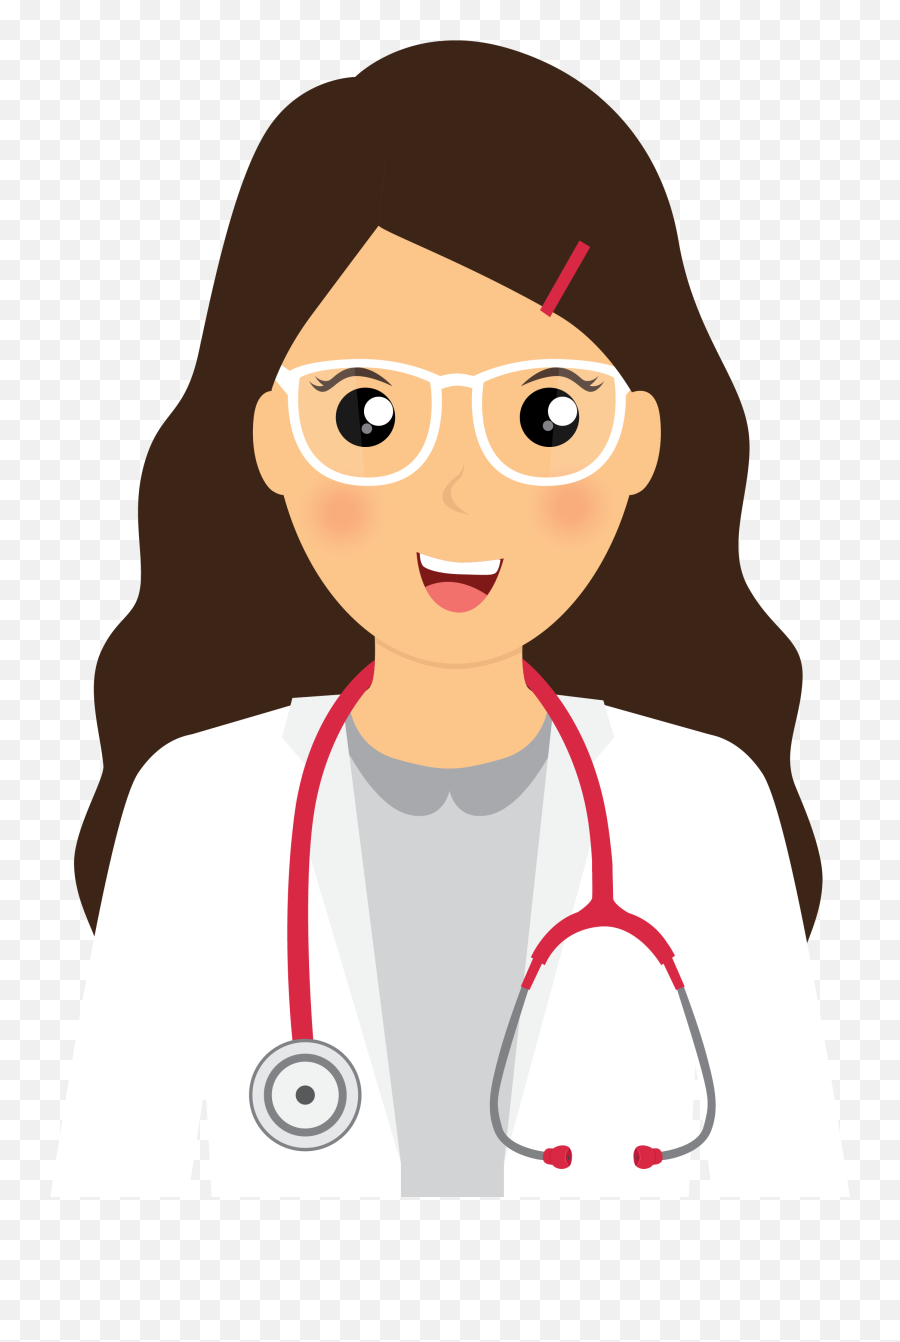 Download Hd Its Important To Discuss - Female Doctor Cartoon Png,Cartoon Woman Png